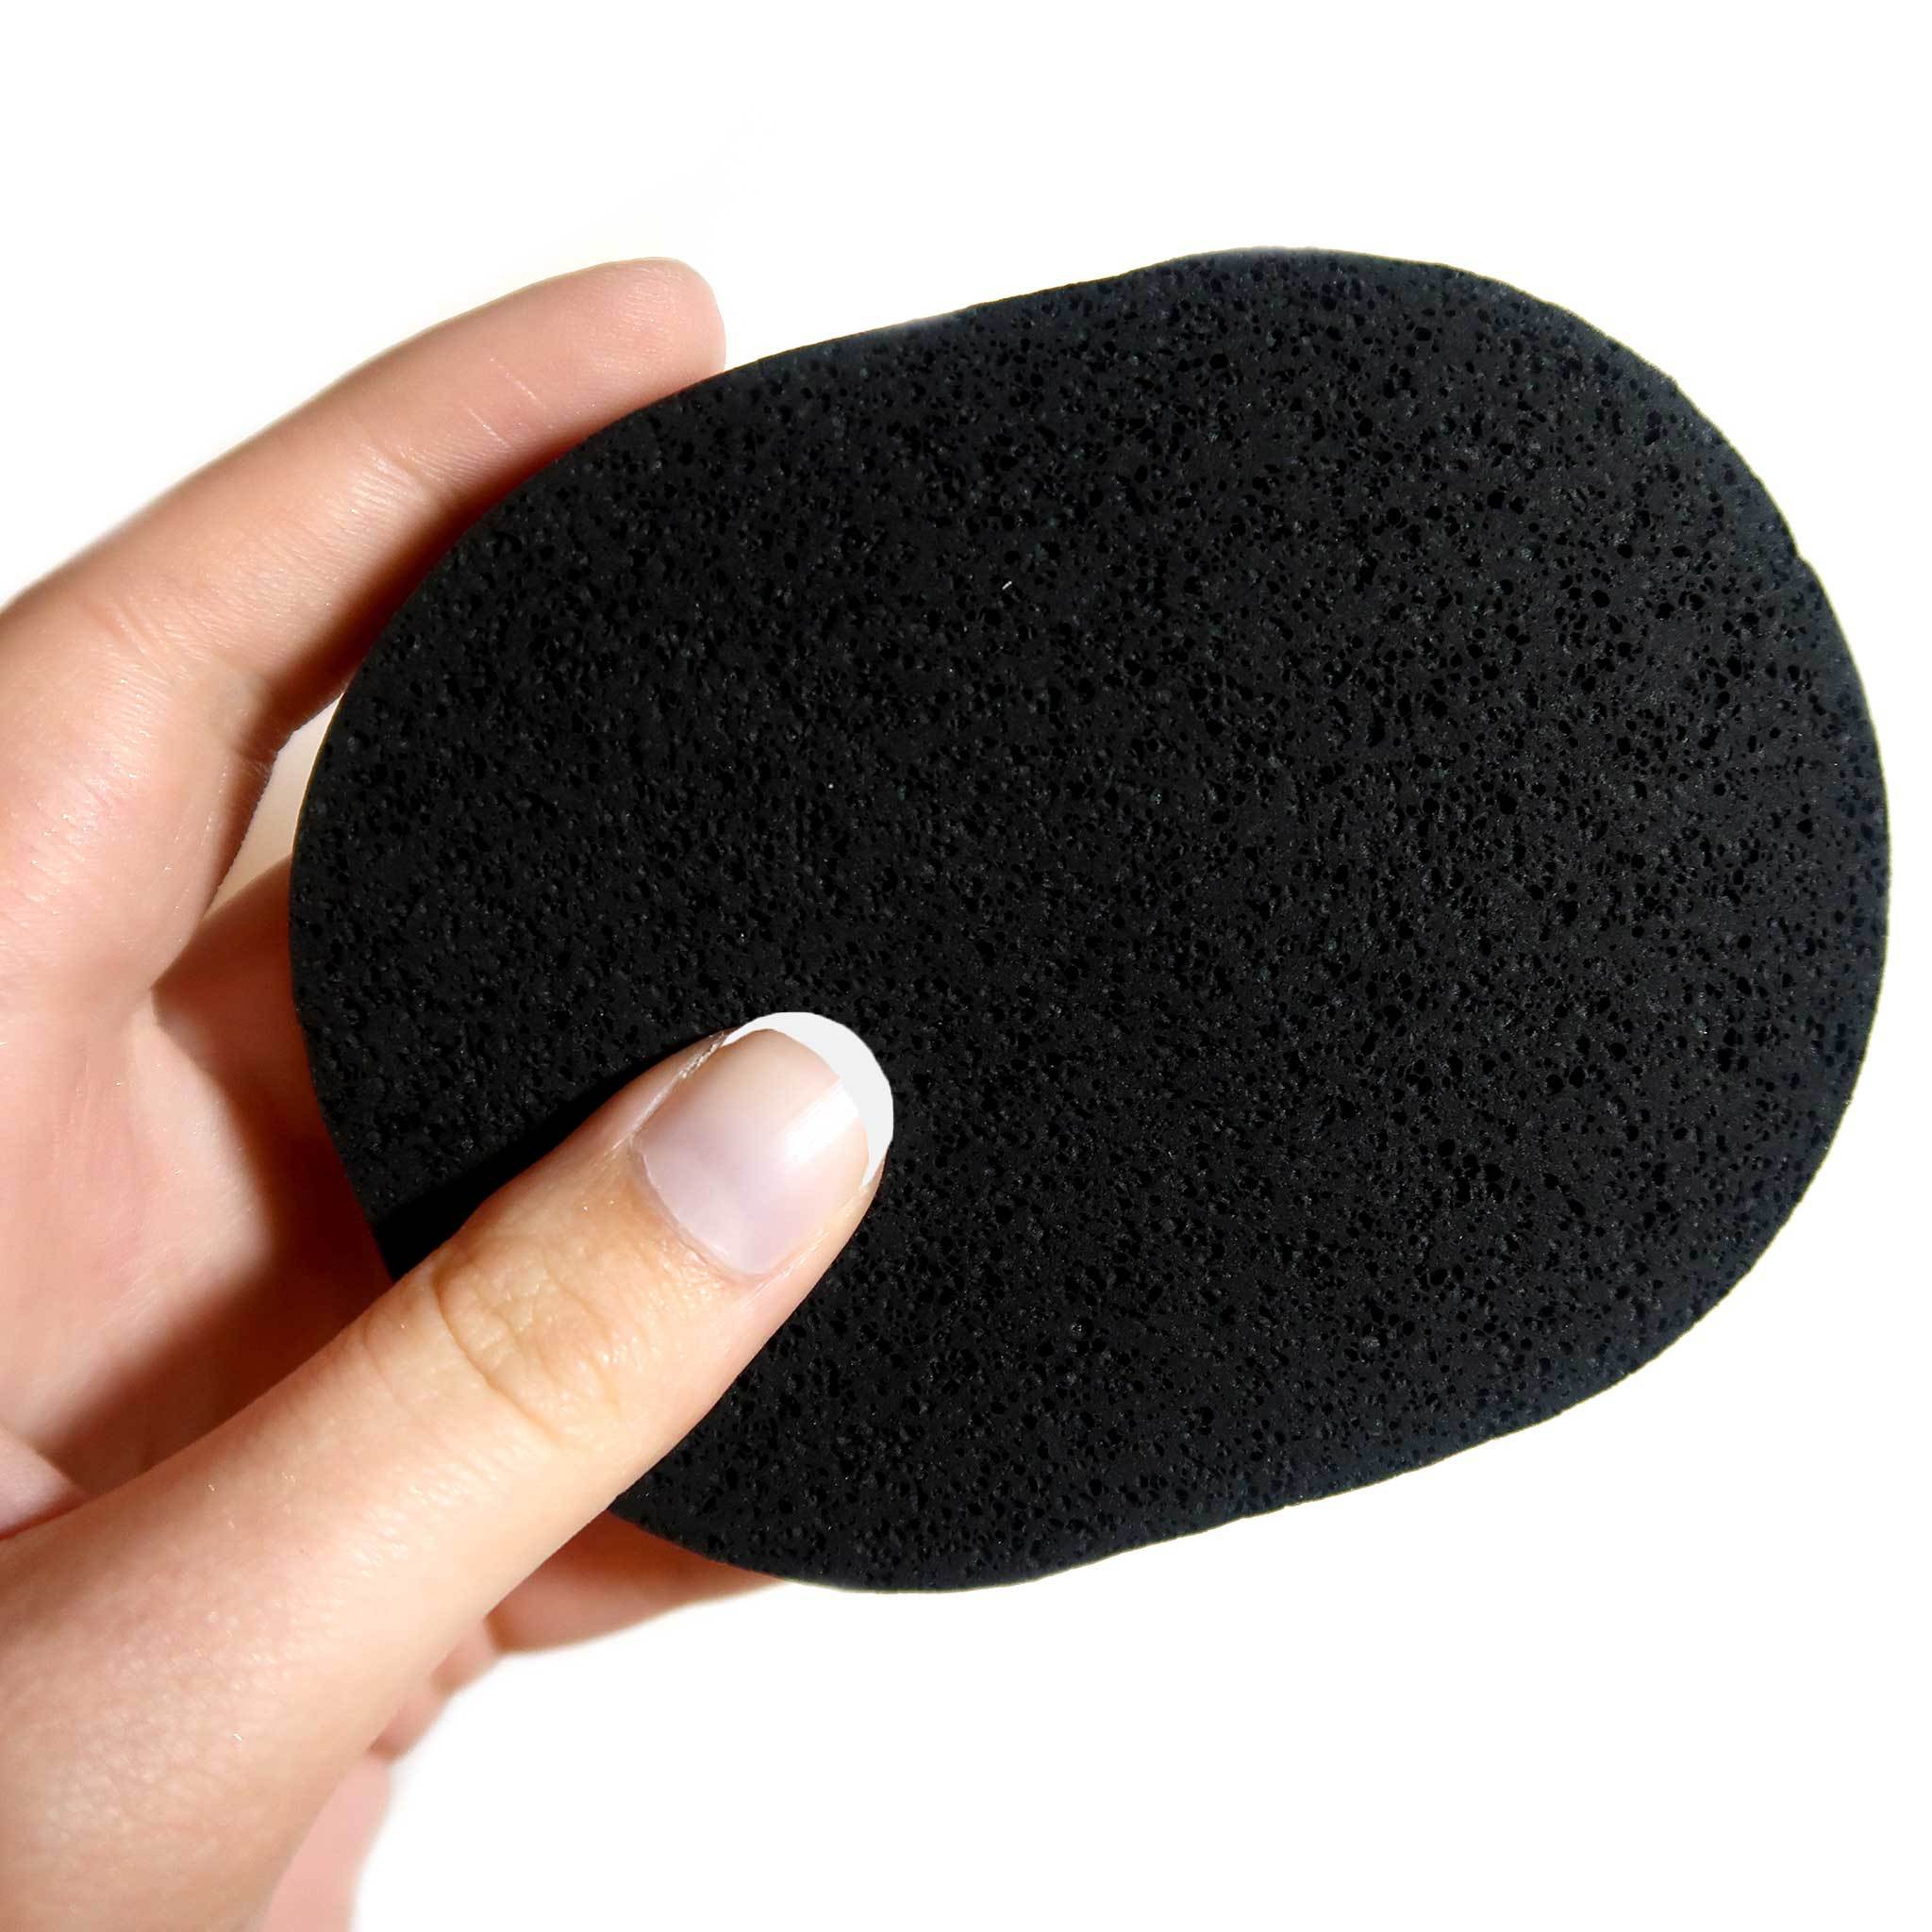 Mask Removal Sponge-Accessories-withSimplicity-withSimplicity